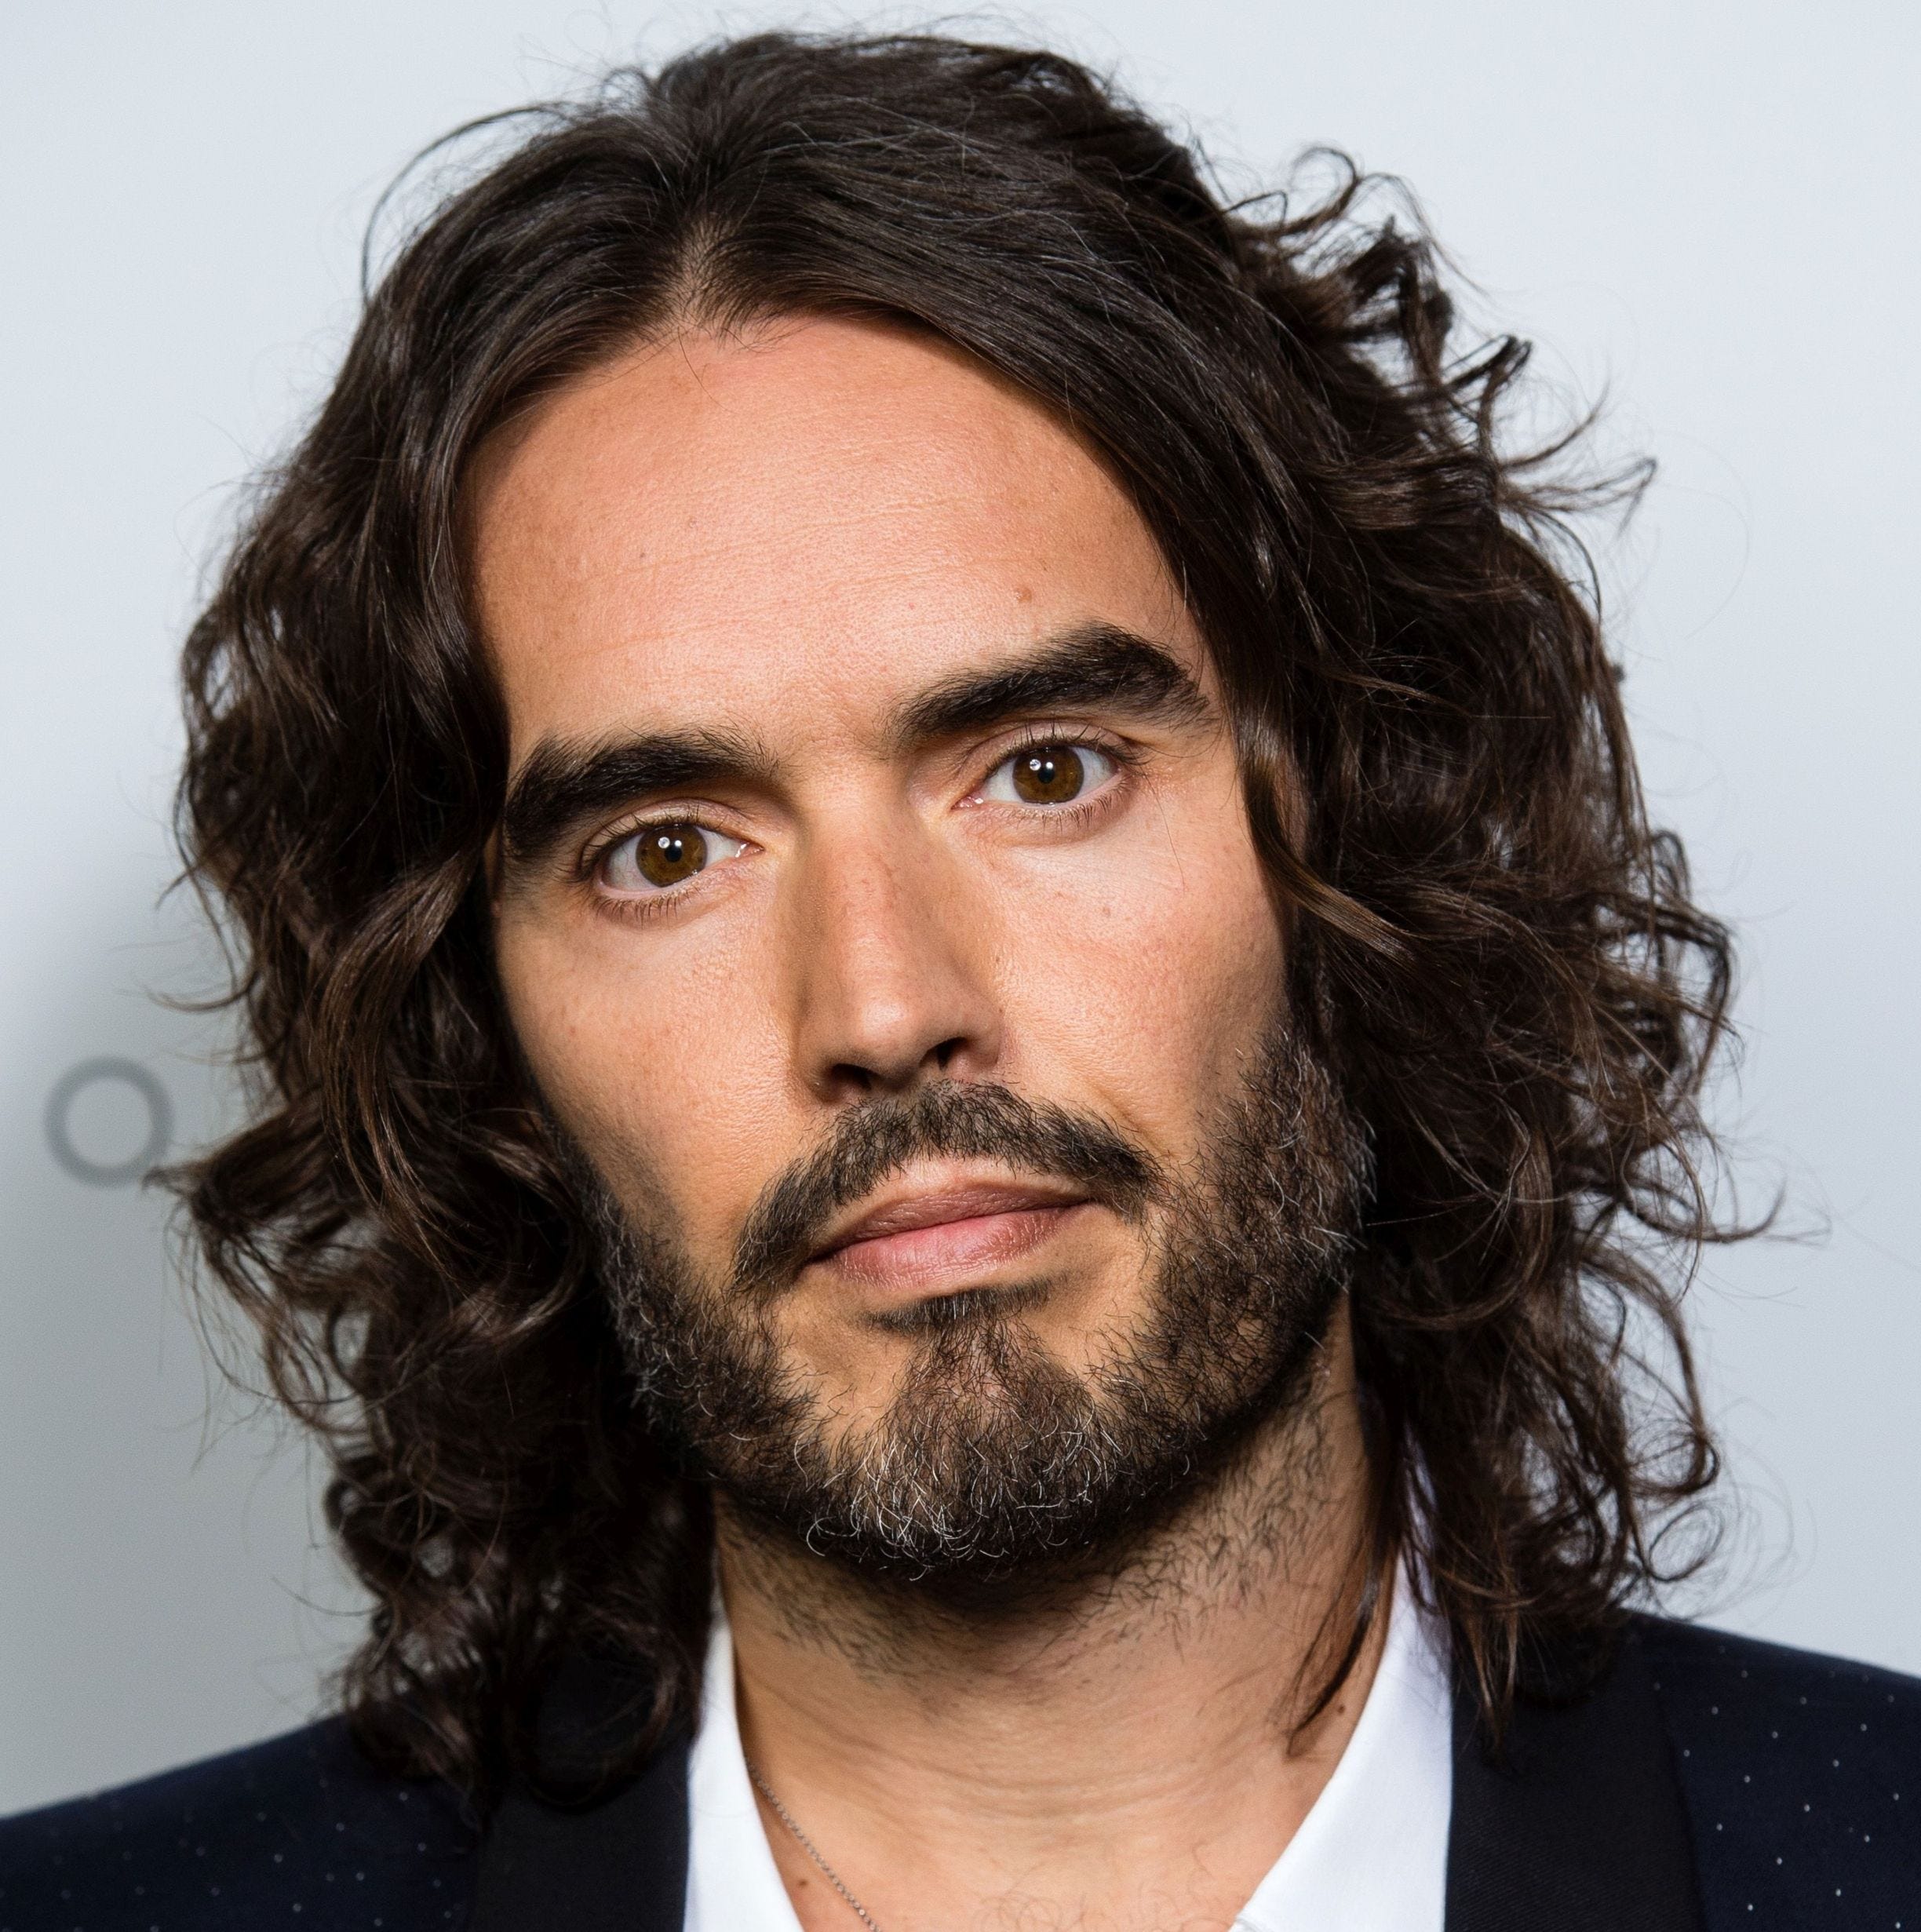 Russell Brand reveals 'inept' parenting, faces backlash